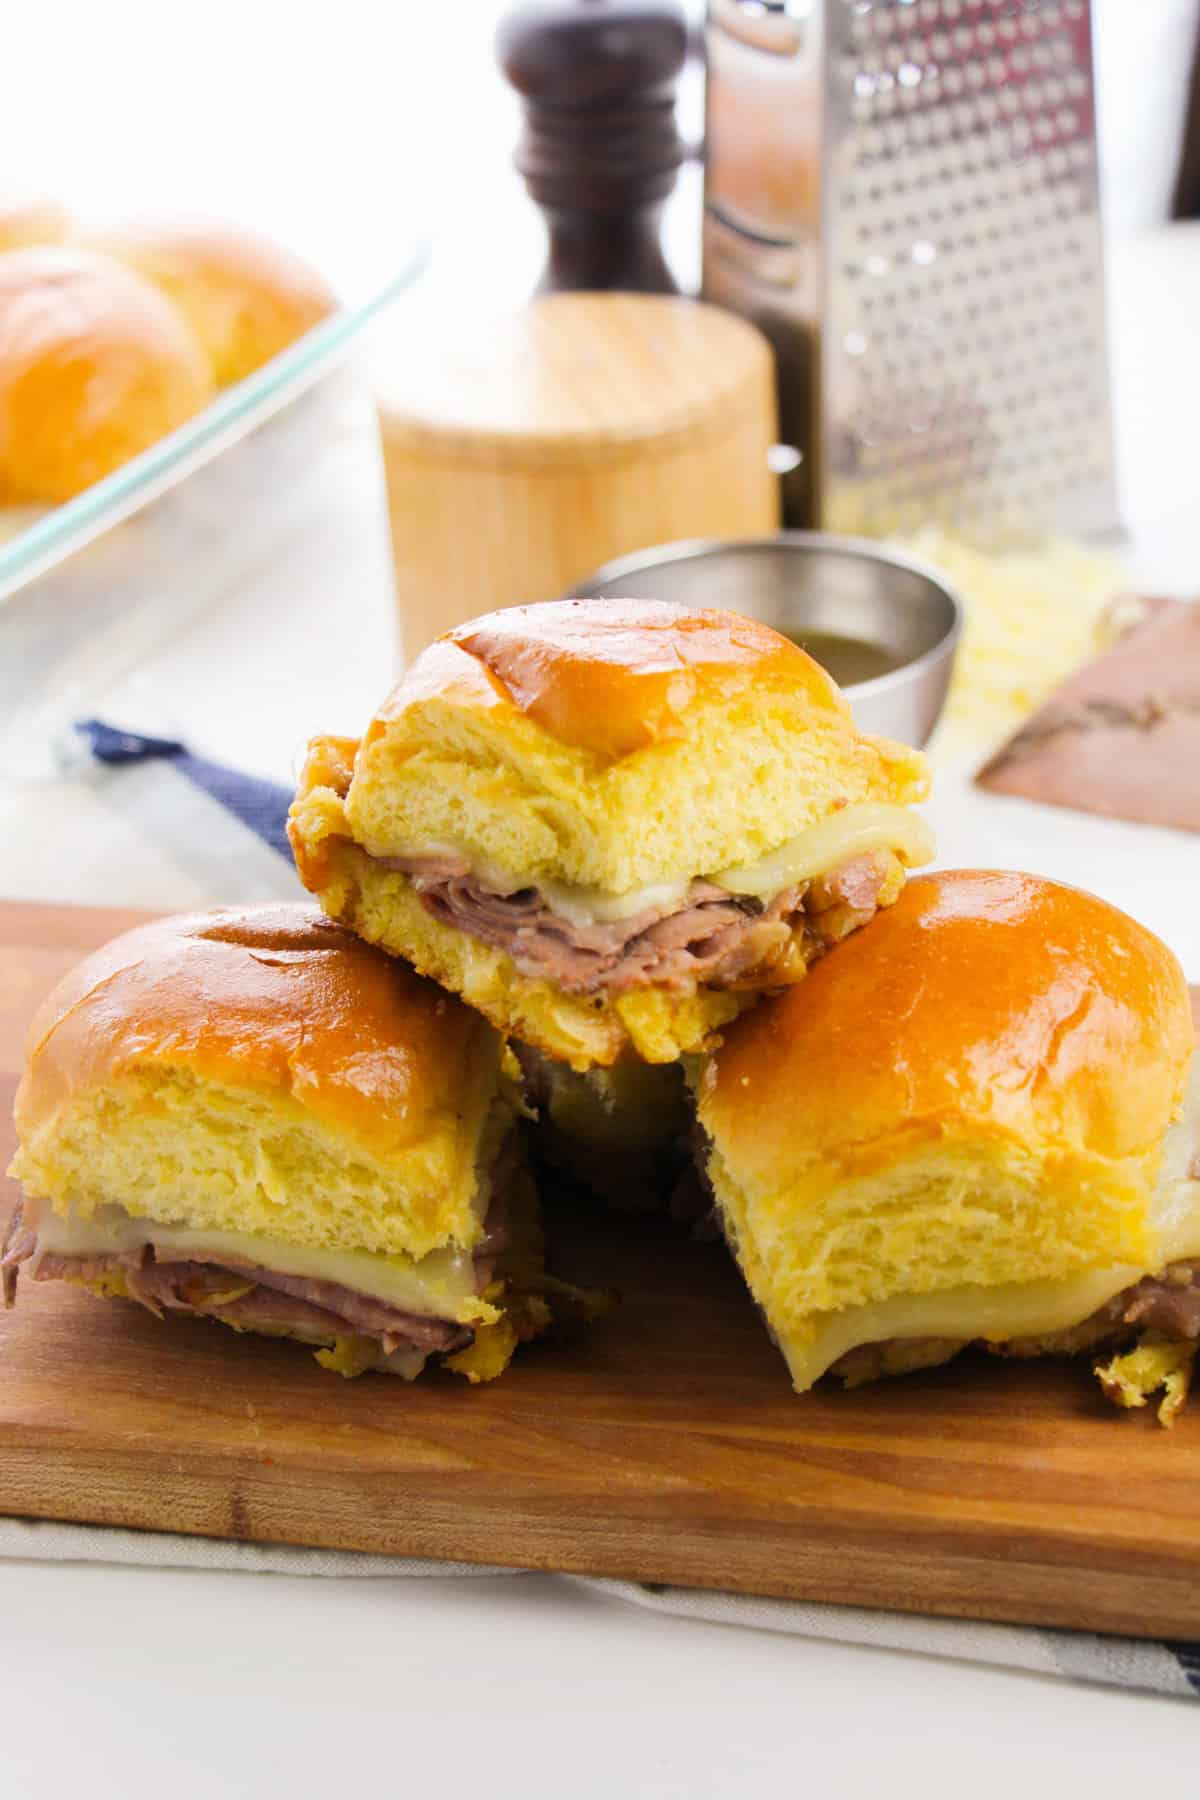 French Dip Sliders with au jus sauce for dipping.